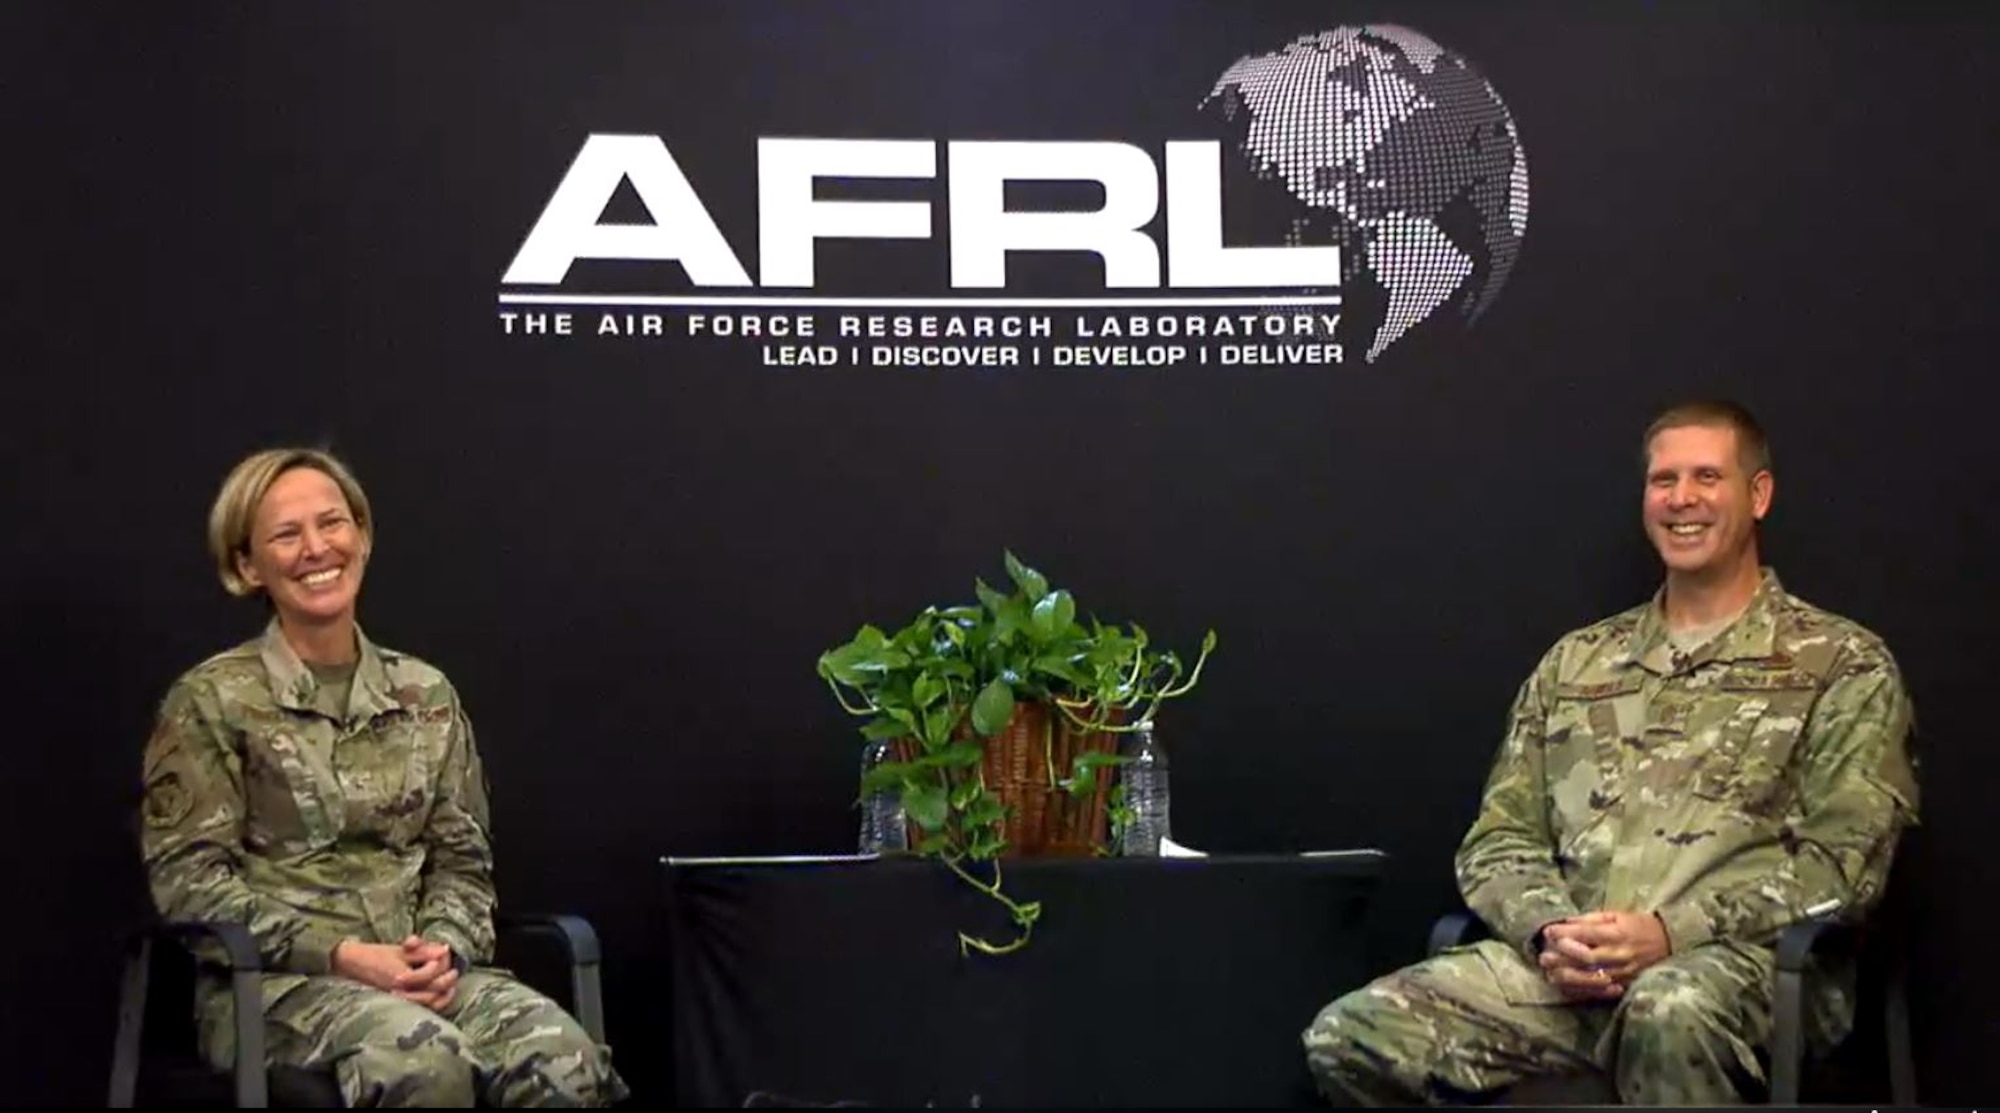 Brig. Gen. Heather Pringle, AFRL Commander, and Chief Master Sgt. Kennon Arnold, AFRL Command Chief, addressed questions during an AFRL virtual town hall event streamed live on AFRL’s Facebook page Aug. 21. During the event, Pringle announced her top three priorities as commander: to accelerate the AF S&T Strategy, to support the U.S. Space Force as one AFRL and to lead the best AFRL Team. (Courtesy photo)